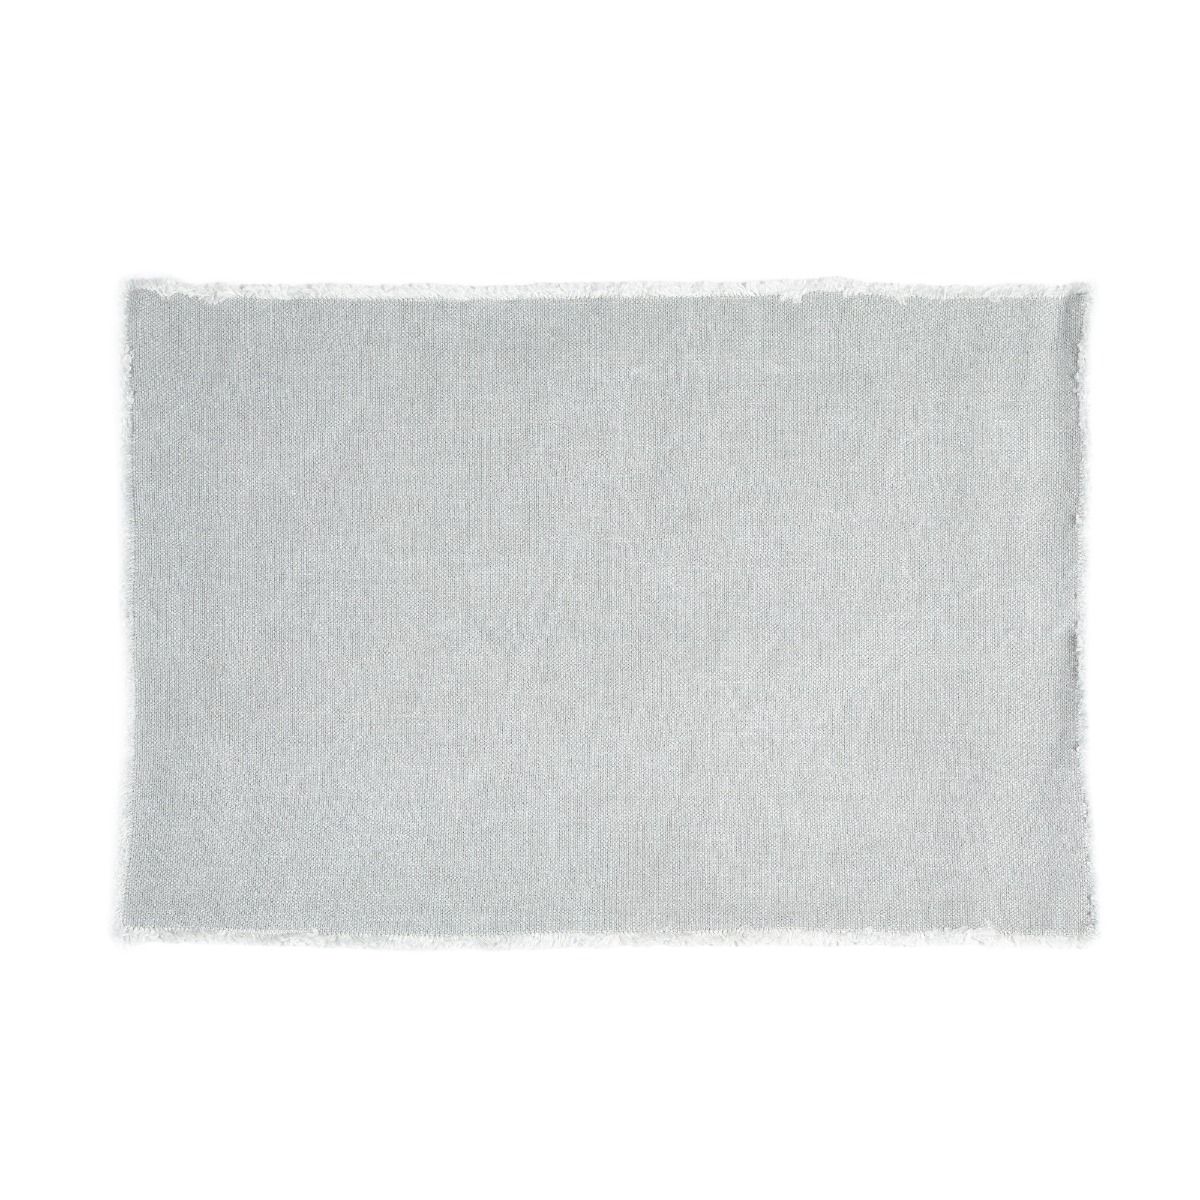 Libeco Pacific Placemat Gray | Libeco | Miss Arthur | Home Goods | Tasmania